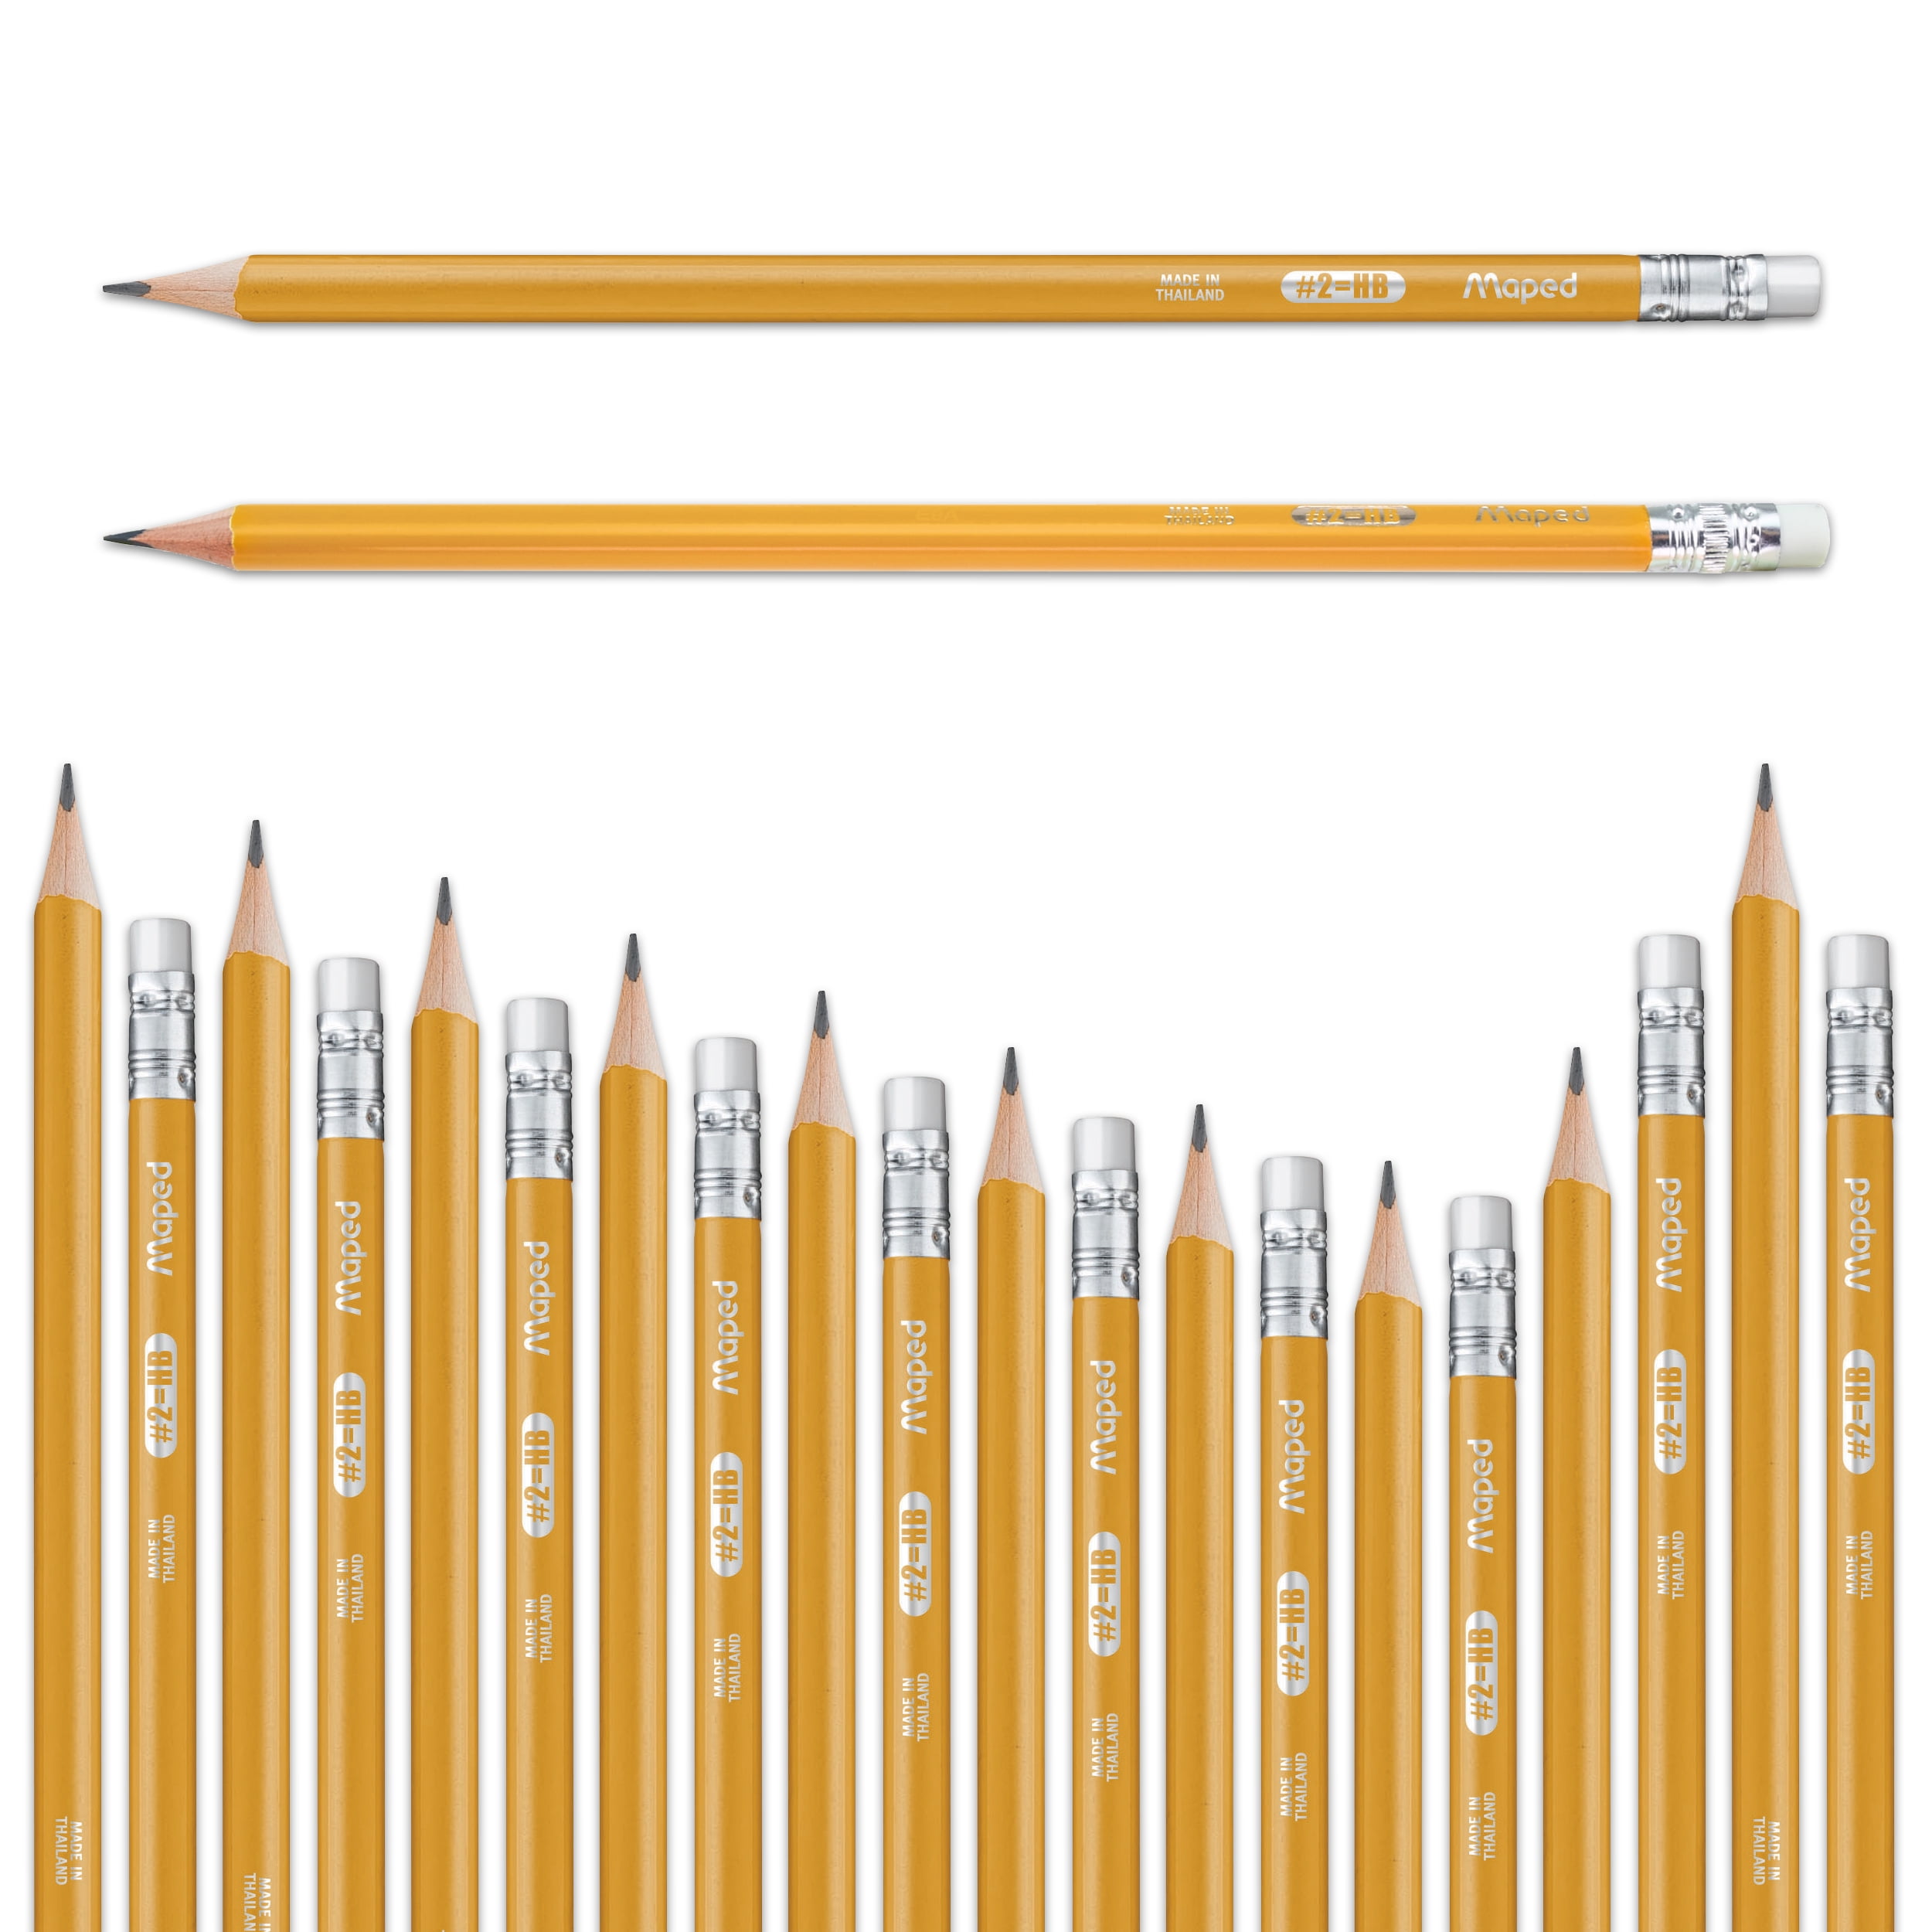 Koala Tools | Bear Claw Pencils (Pack of 6) - Fat, Thick, Triangular Grip, Extra-Dark 6b Graphite Core with Eraser - Suitable for Kids, Art, Drawing